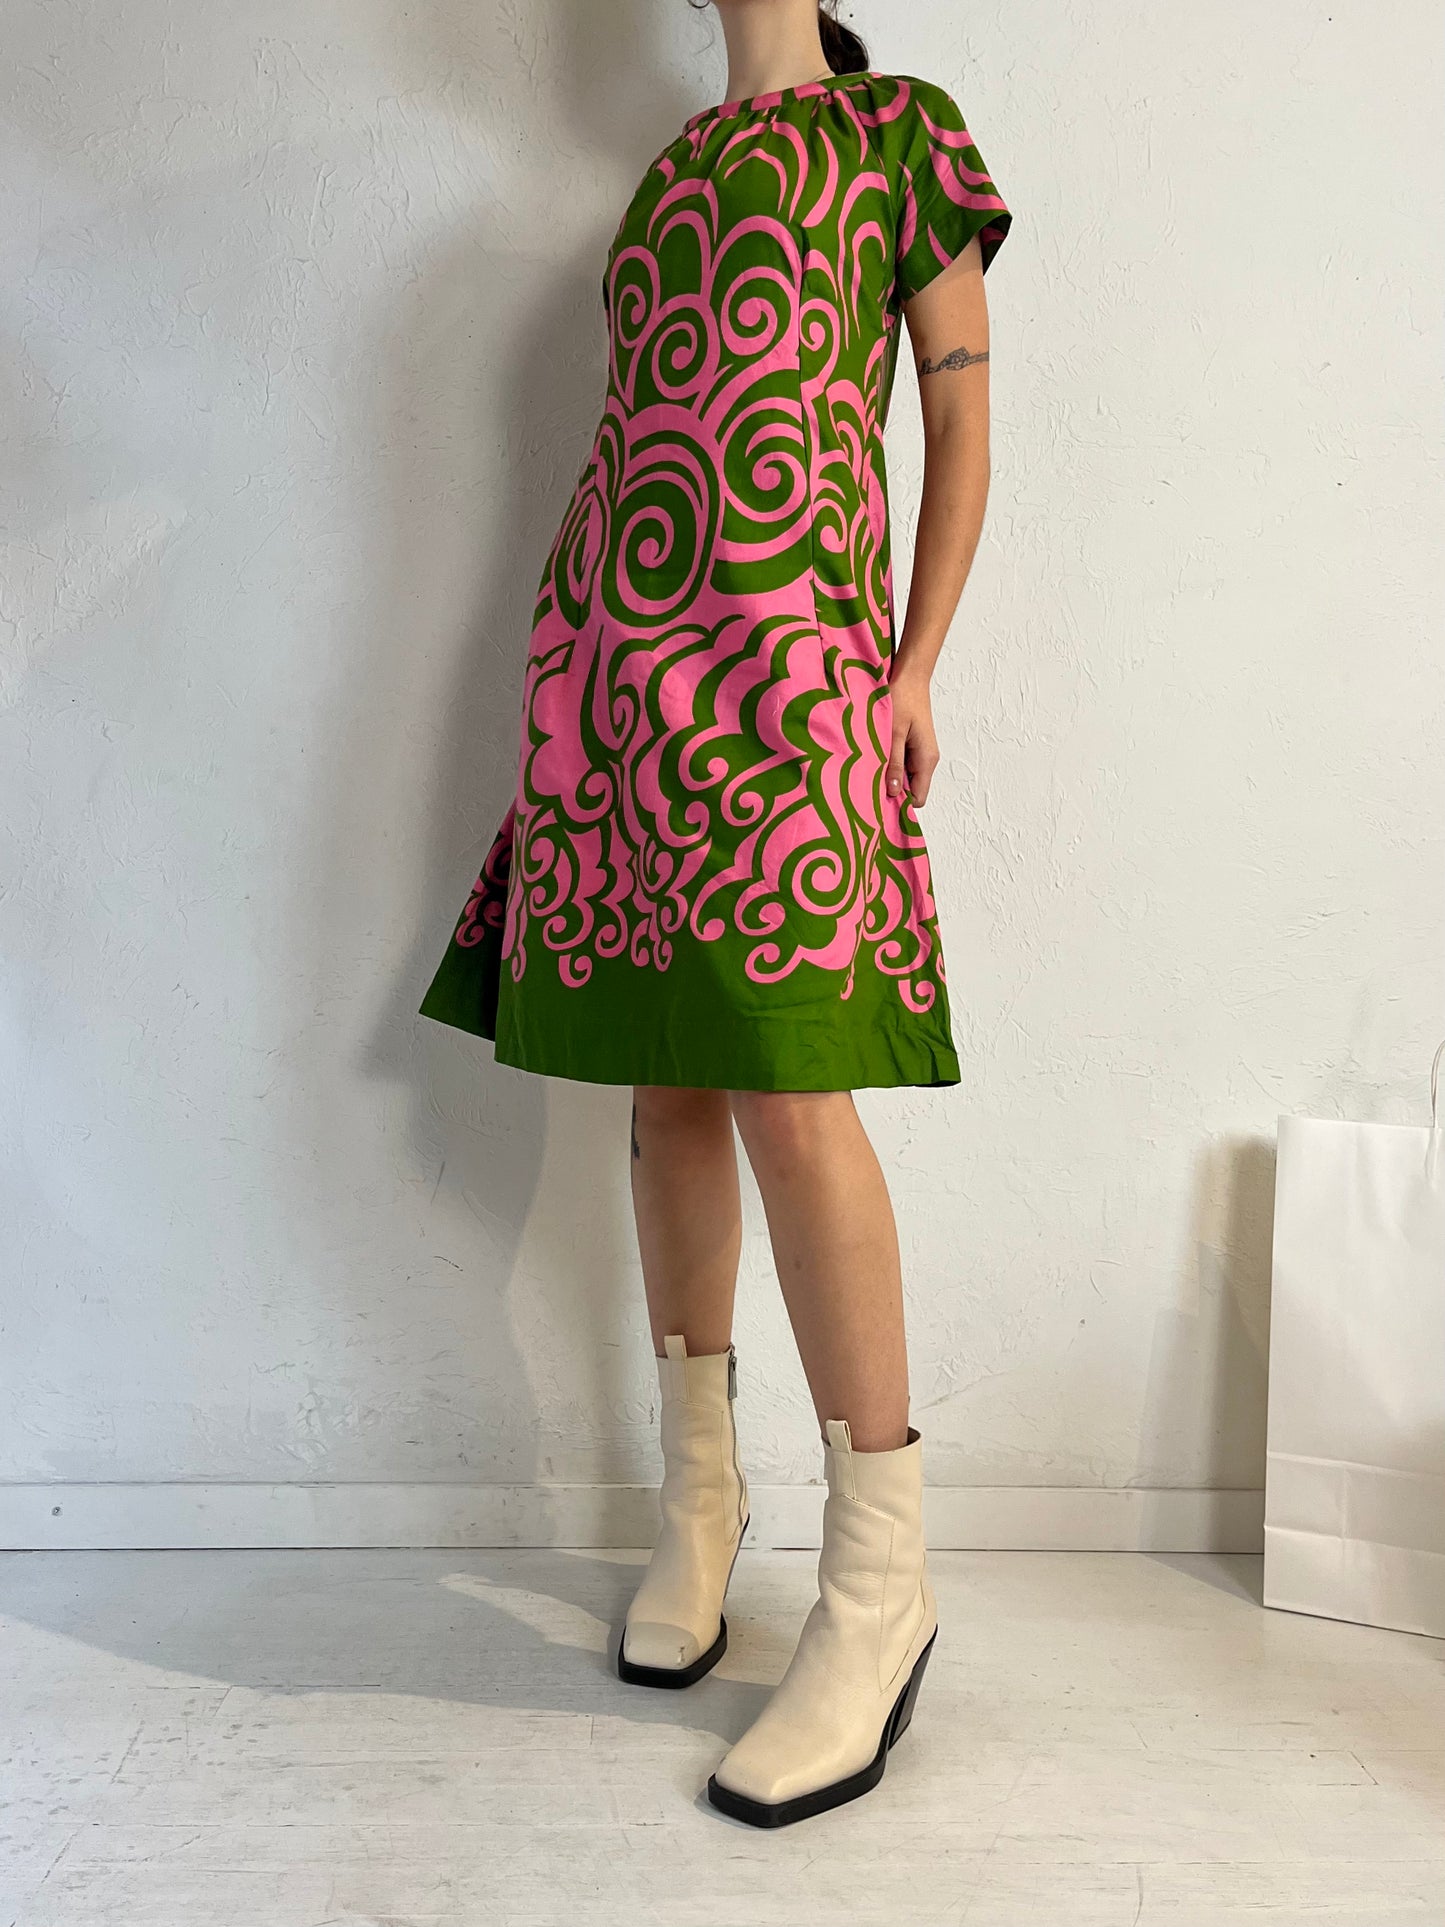 70s 'Rhapsody' Pink and Green Patterned Dress / Small